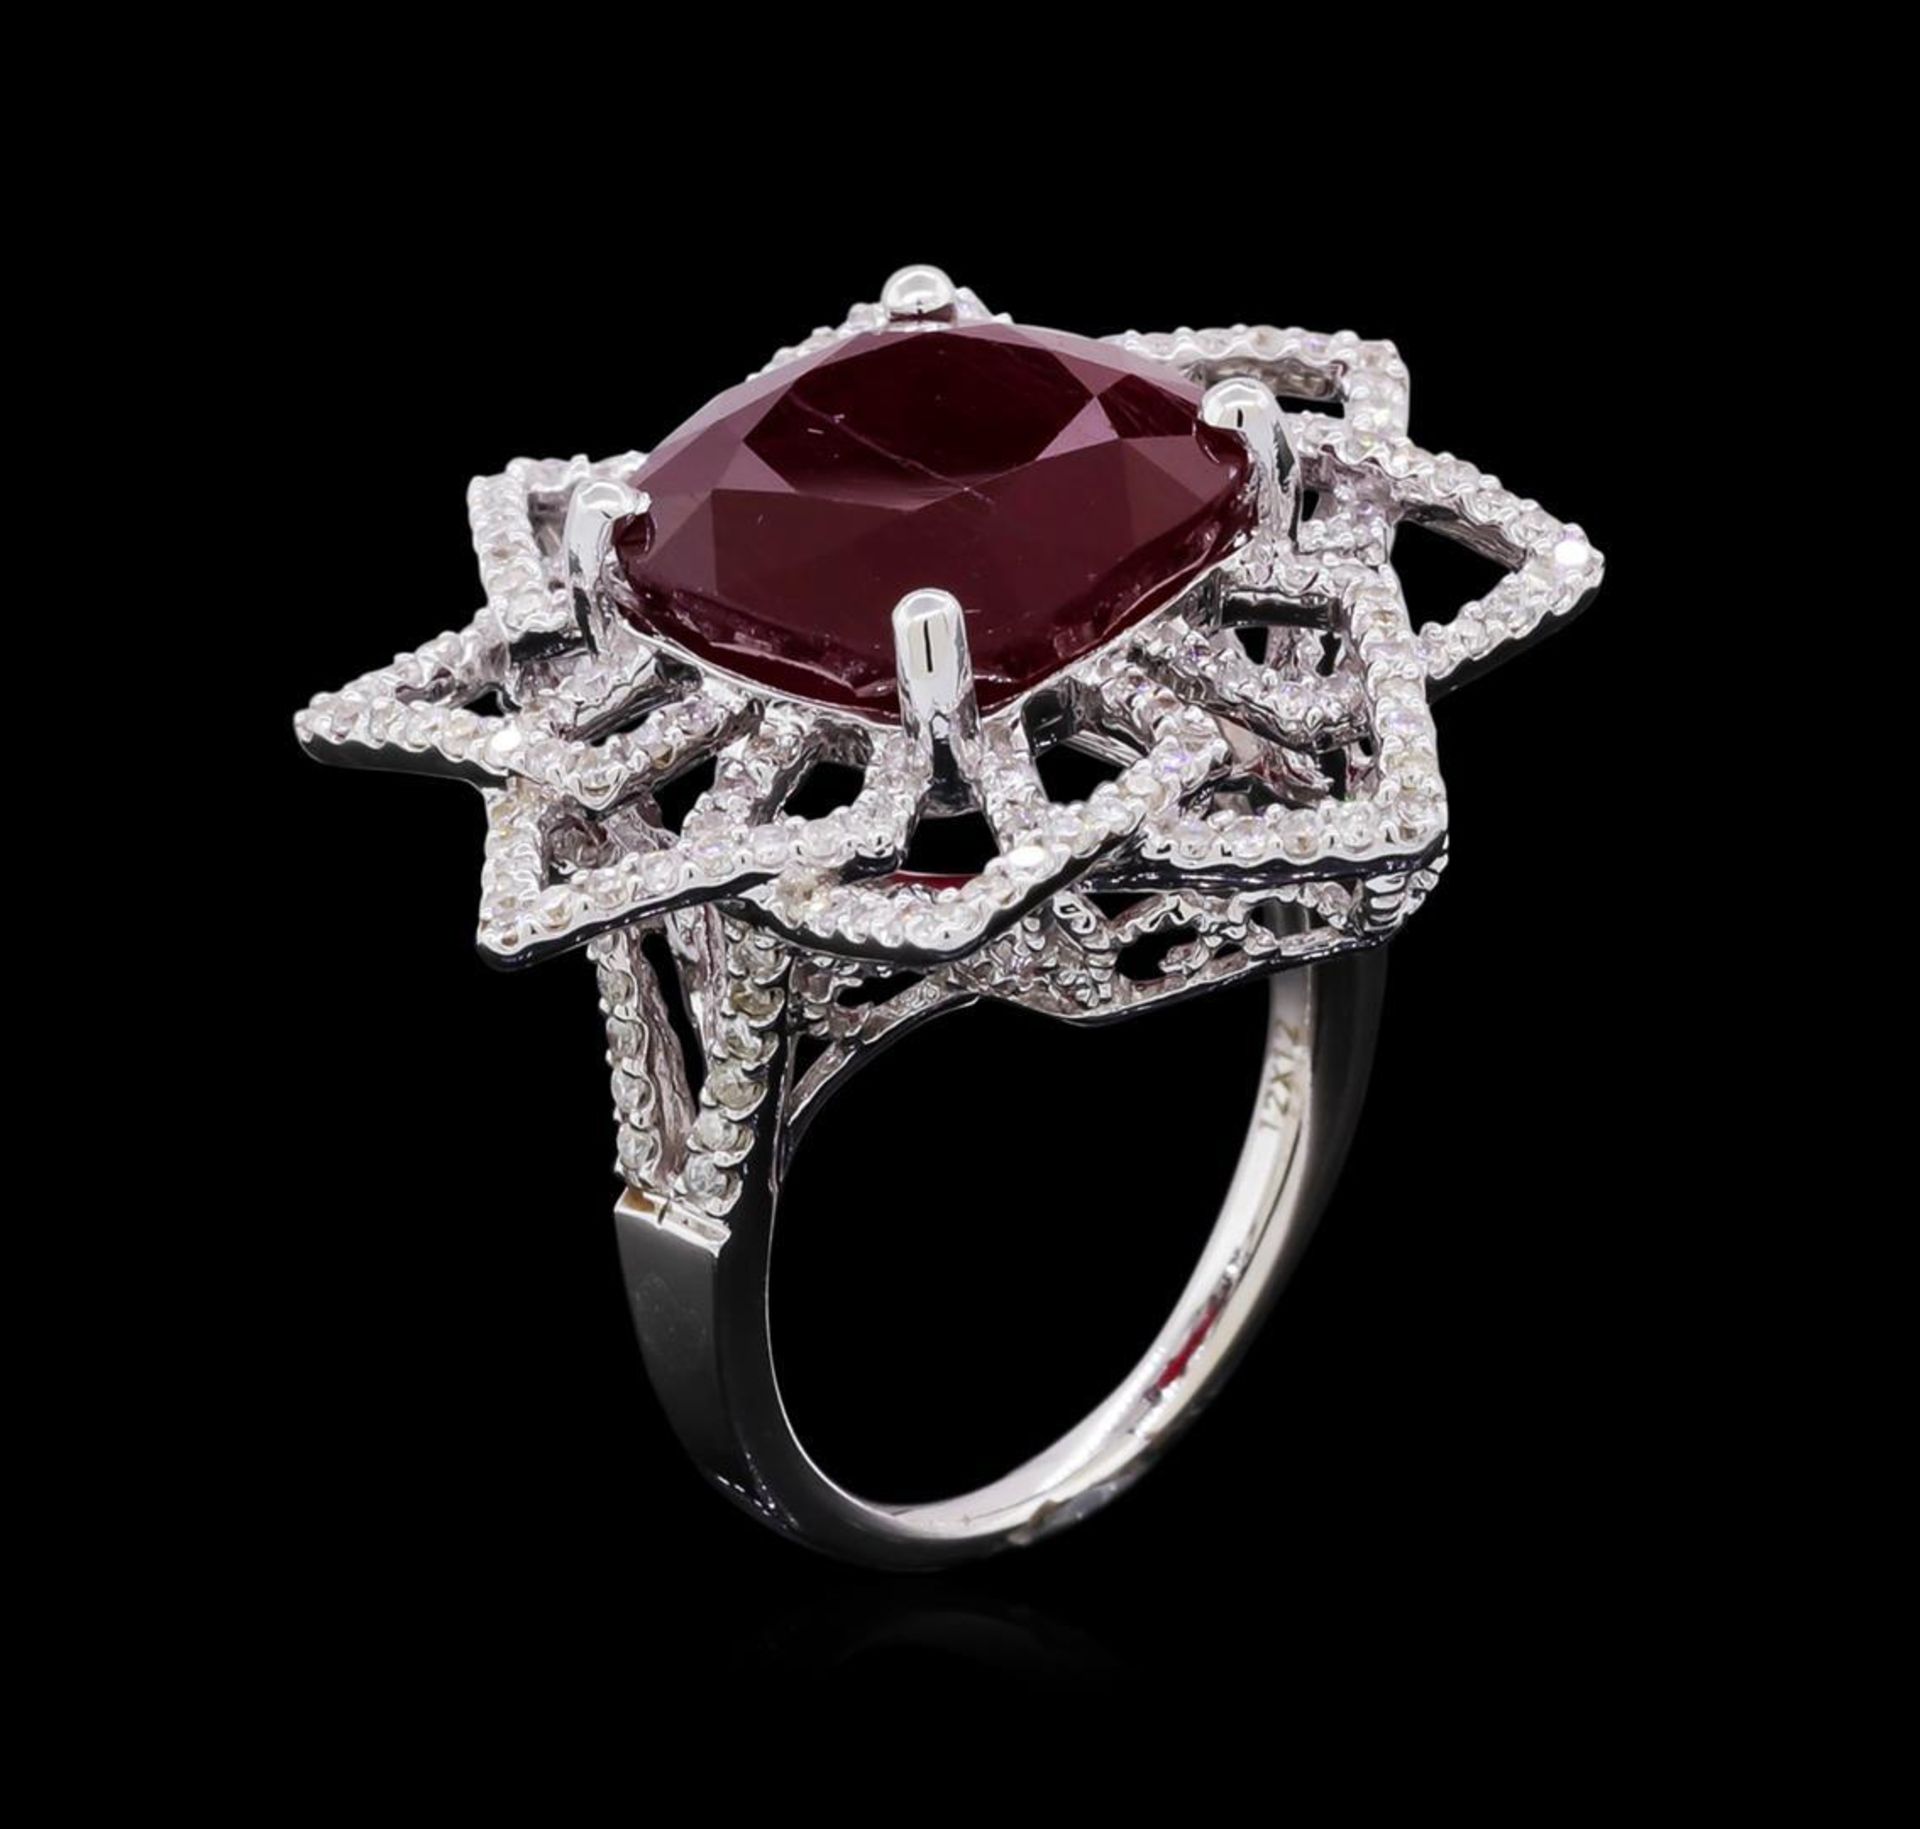 14KT White Gold 11.02 ctw Ruby and Diamond Ring - Image 4 of 5